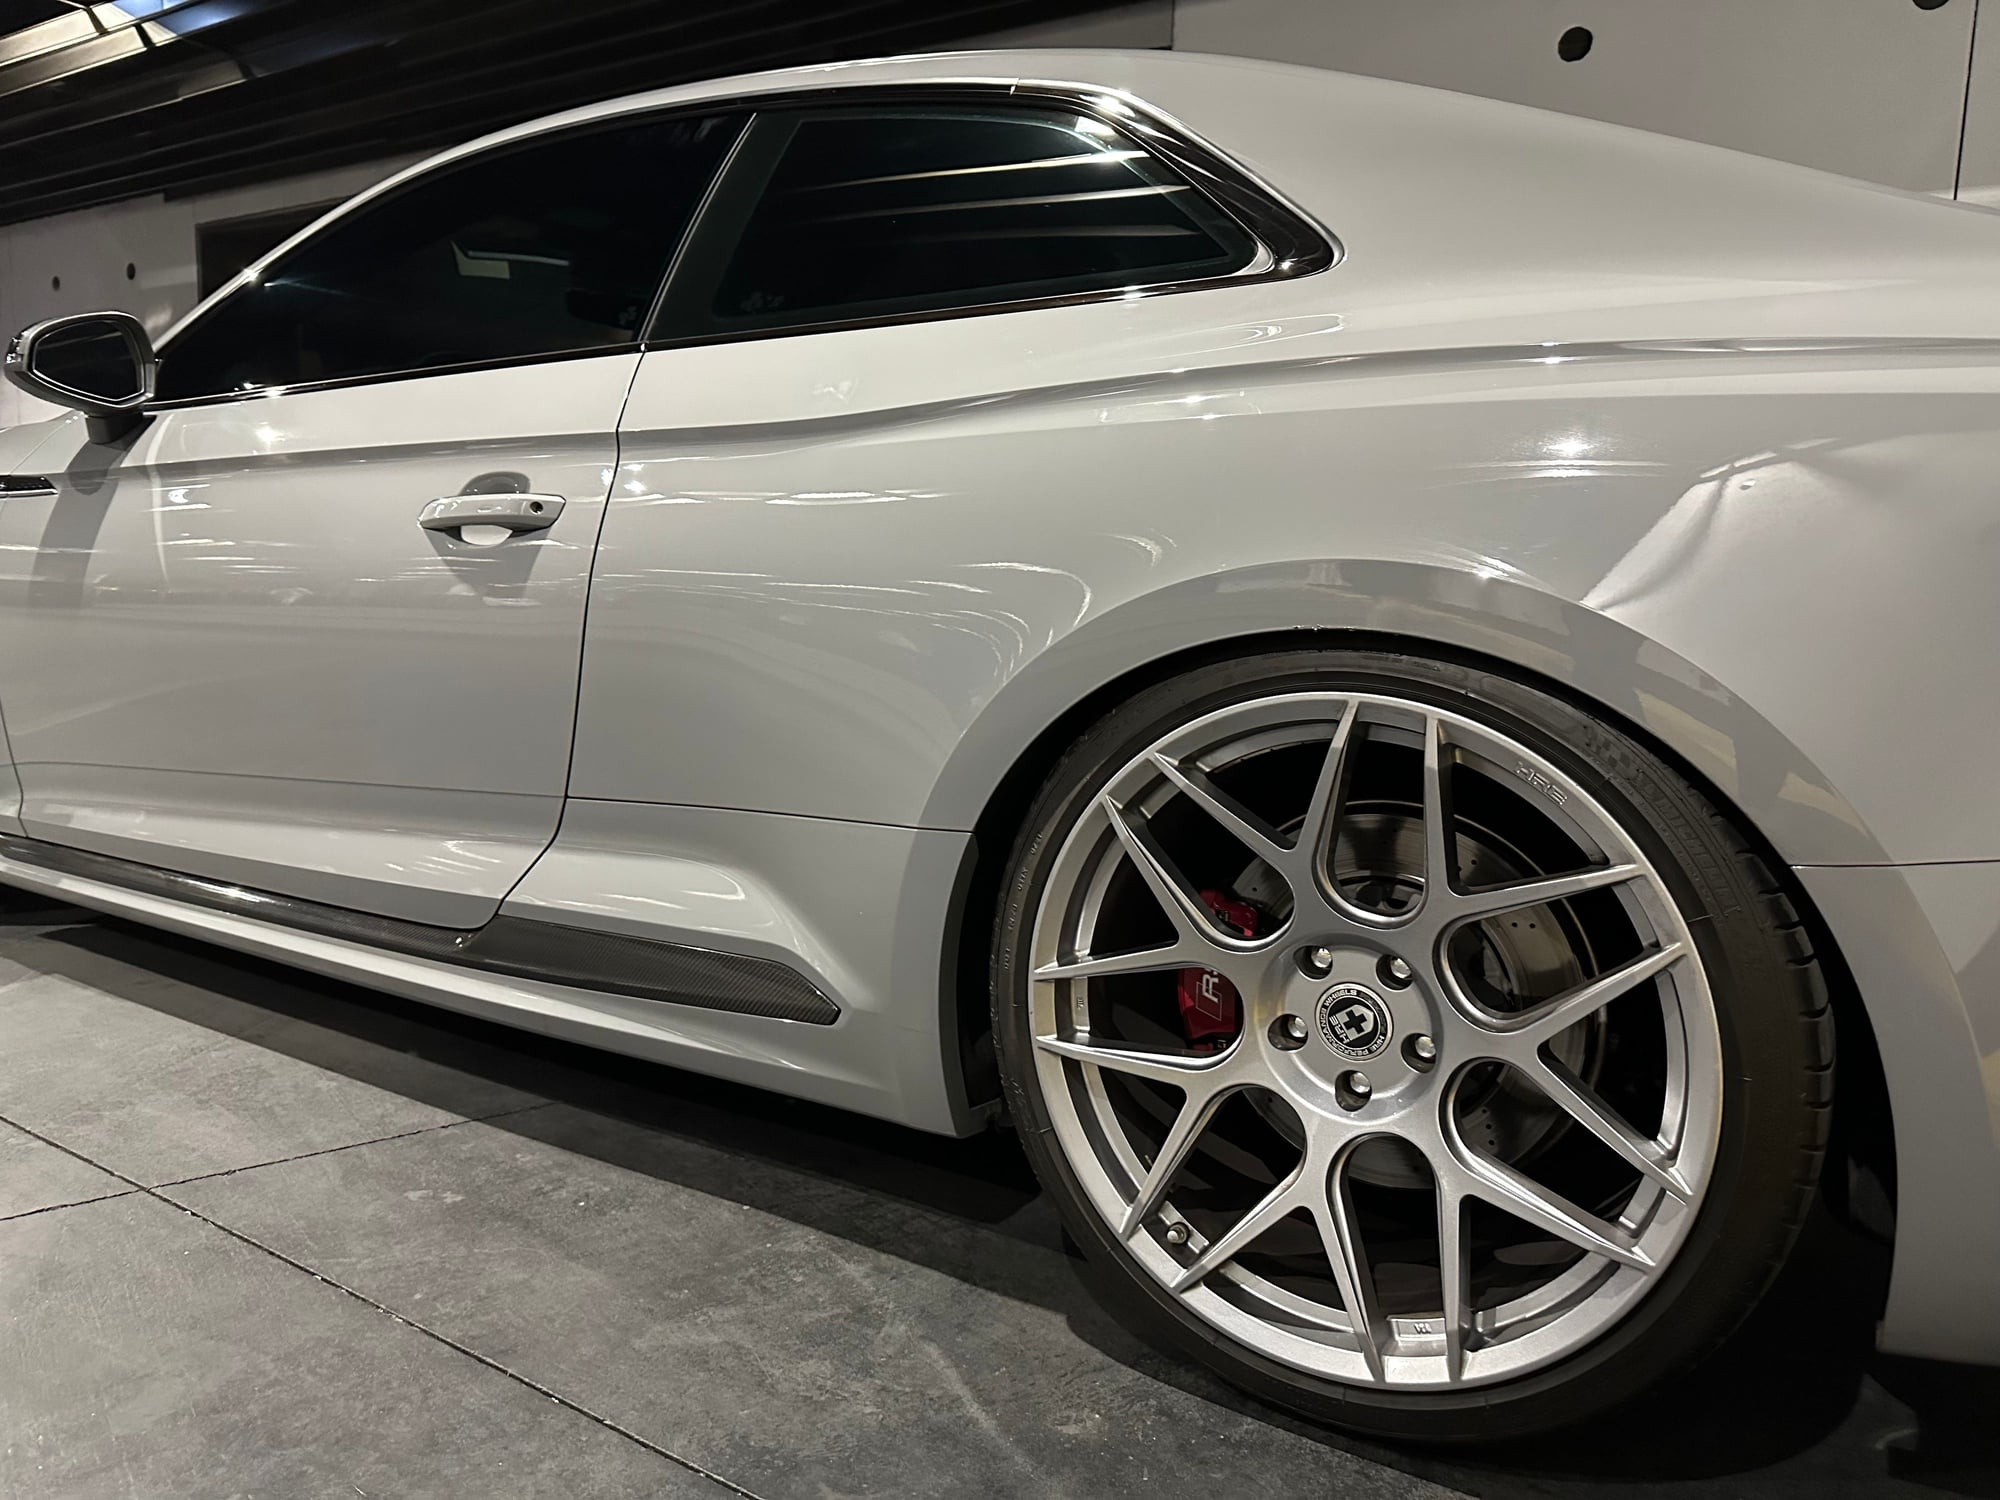 2019 Audi RS5 - You will not find a better looking 2019 RS5 - Used - Las Vegas, NV 89138, United States